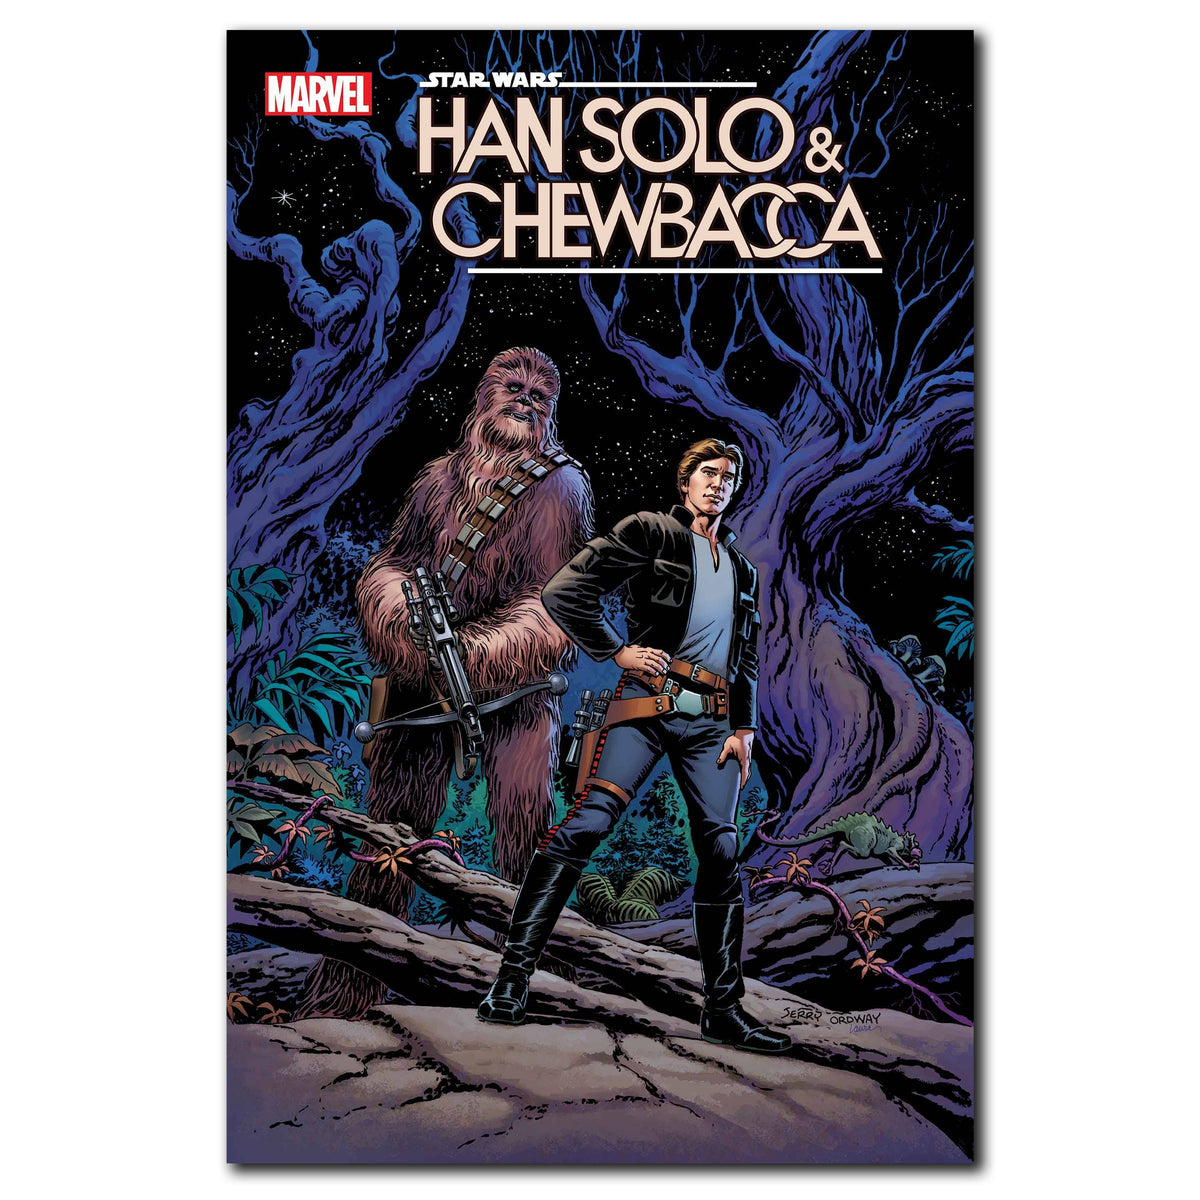 Star Wars Han Solo & Chewbacca #8 Cover Variant ORDWAY FINALSALE